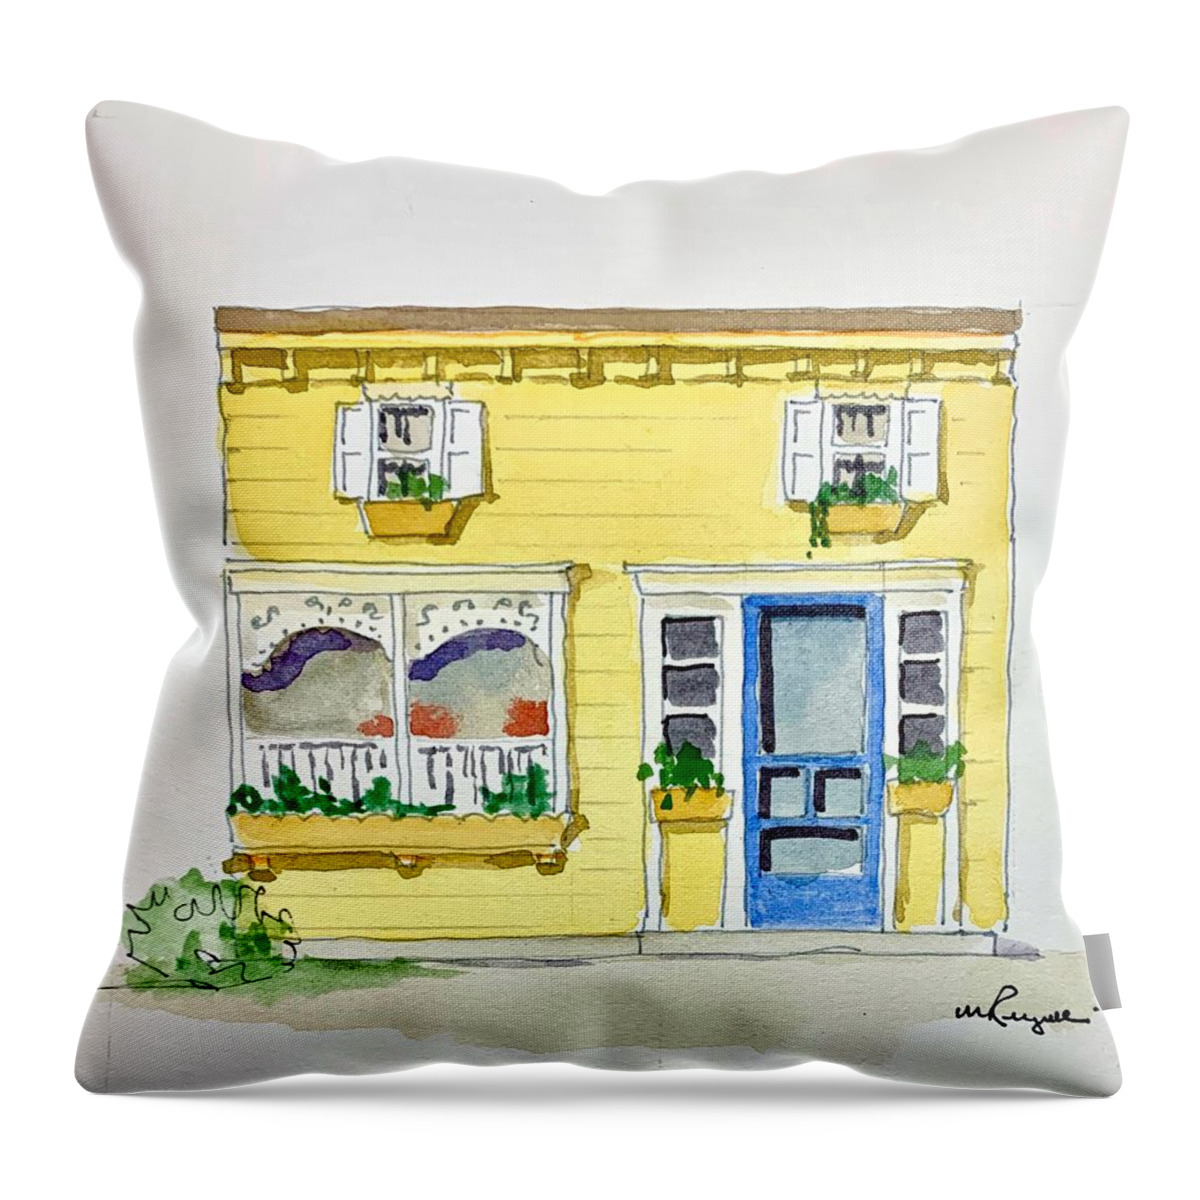 Watercolor Throw Pillow featuring the painting Cape May Cafe by William Renzulli